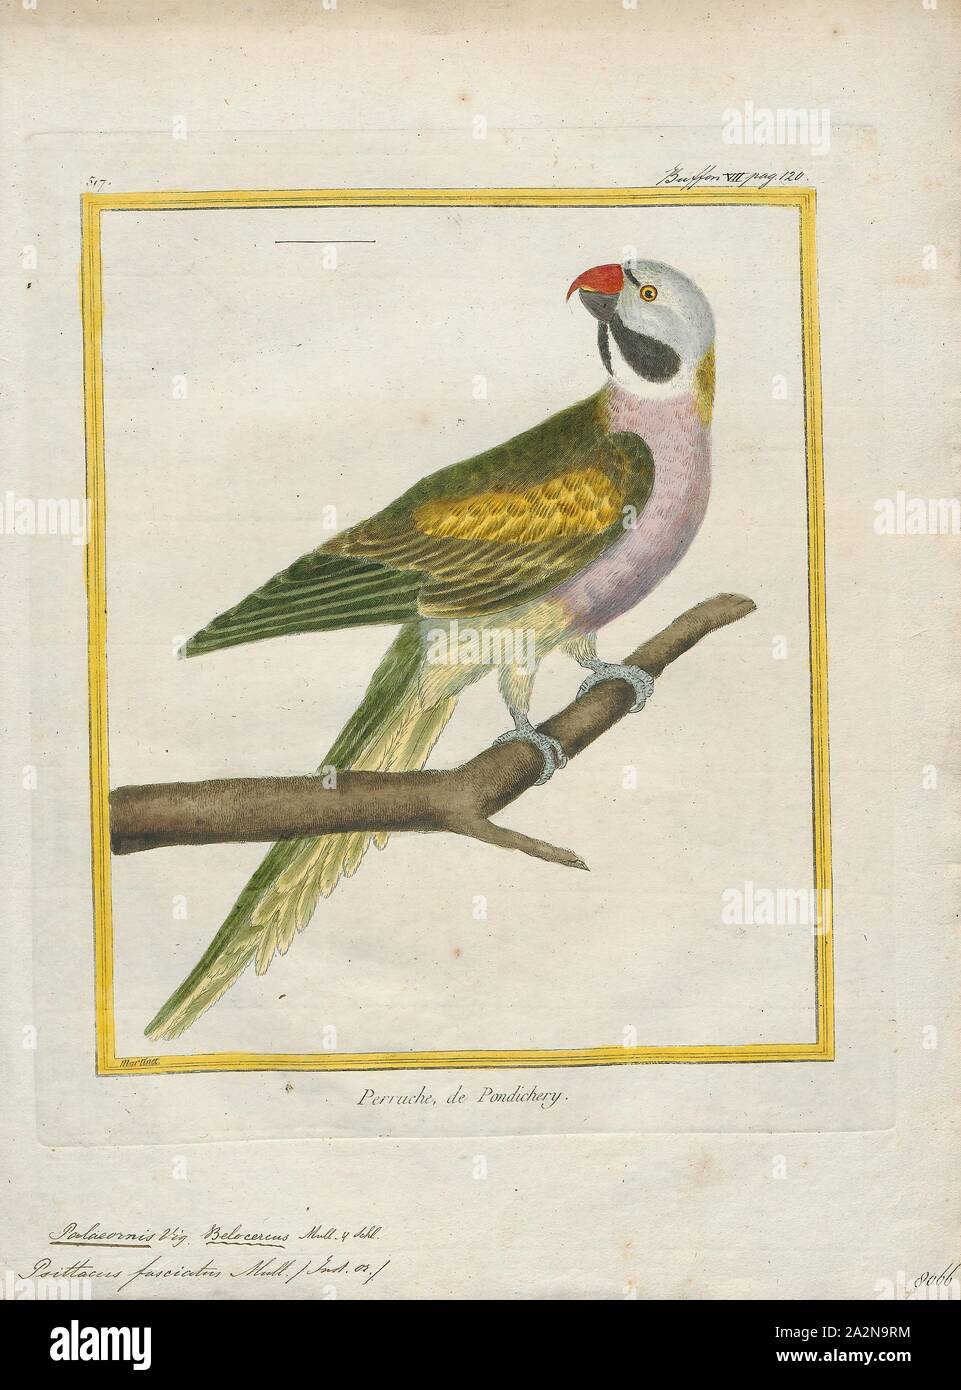 Palaeornis fasciatus, Print, Psittacula, Members of the parrot genus Psittacula or Afro-Asian ring-necked parakeets as they are commonly known in aviculture originates found from Africa to South-East Asia. It is a widespread group, with a clear concentration of species in south Asia, but also with representatives in Africa and the islands of the Indian Ocean. This is the only genus of Parrot which has the majority of its species in continental Asia. Of all the extant species only Psittacula calthropae, Psittacula caniceps and Psittacula echo do not have a representative subspecies in any part Stock Photo